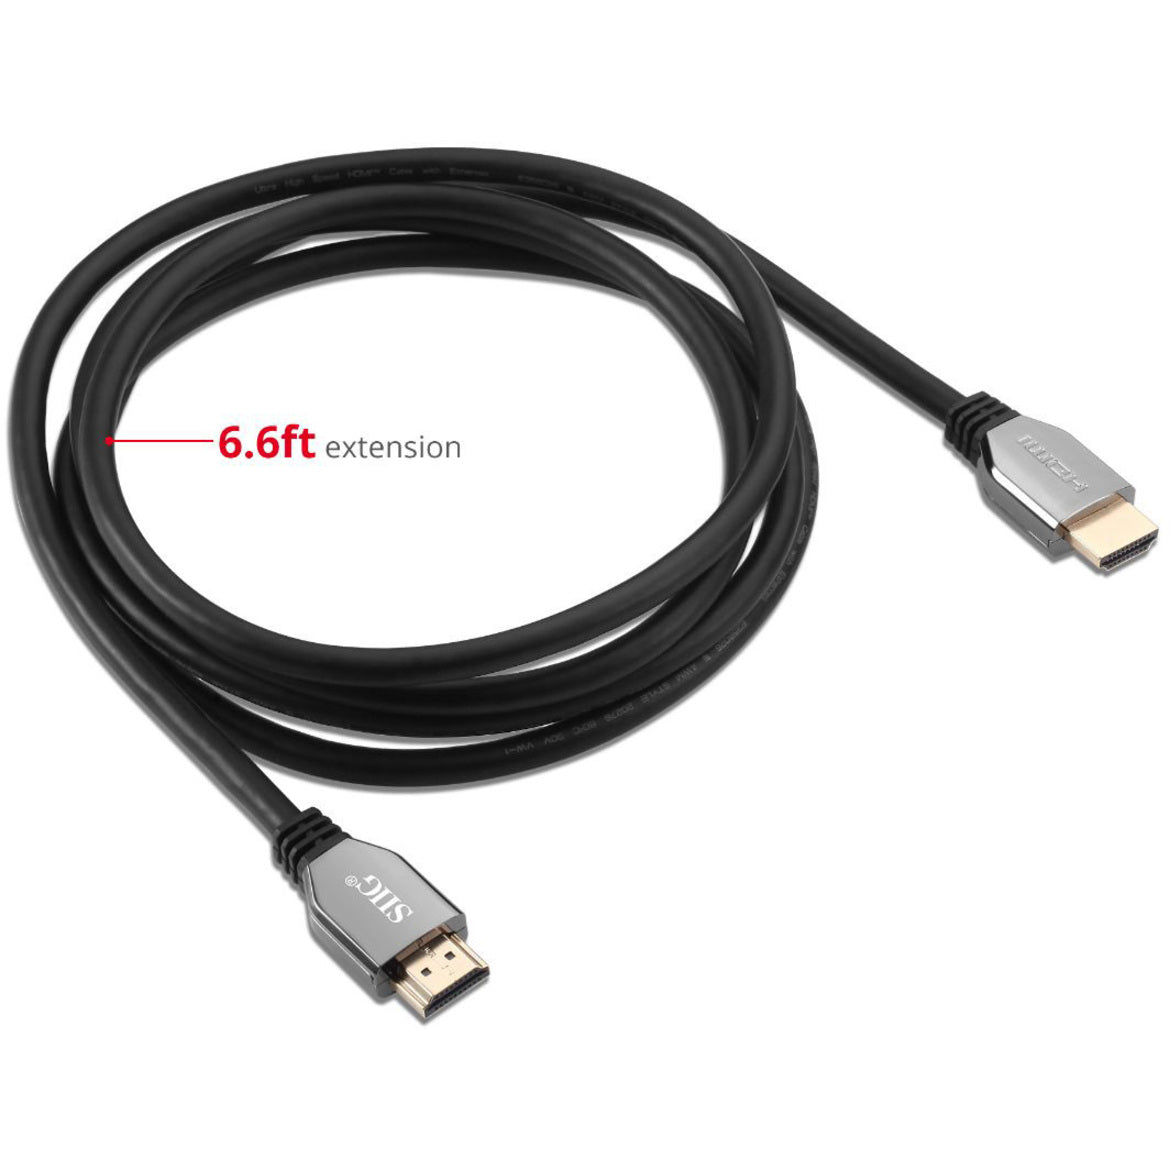 SIIG CB-H21511-S1 8K Ultra High Speed HDMI Cable - 6.6ft, HDCP 2.2, EMI/RF Protection, Gold Plated Connectors